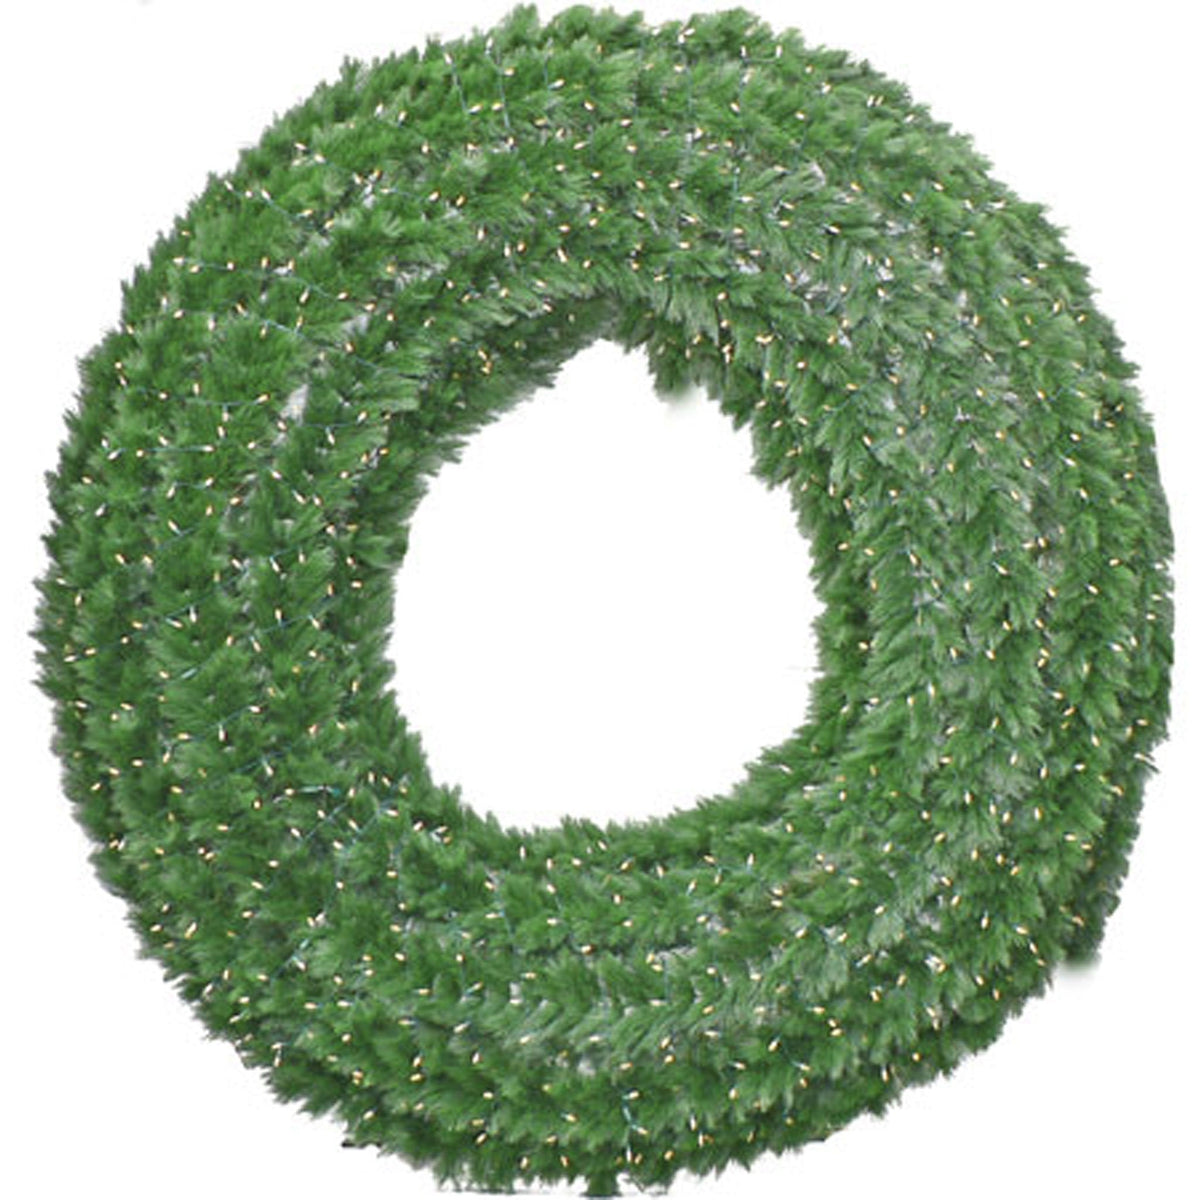 8FT Commercial Pine Christmas Wreath